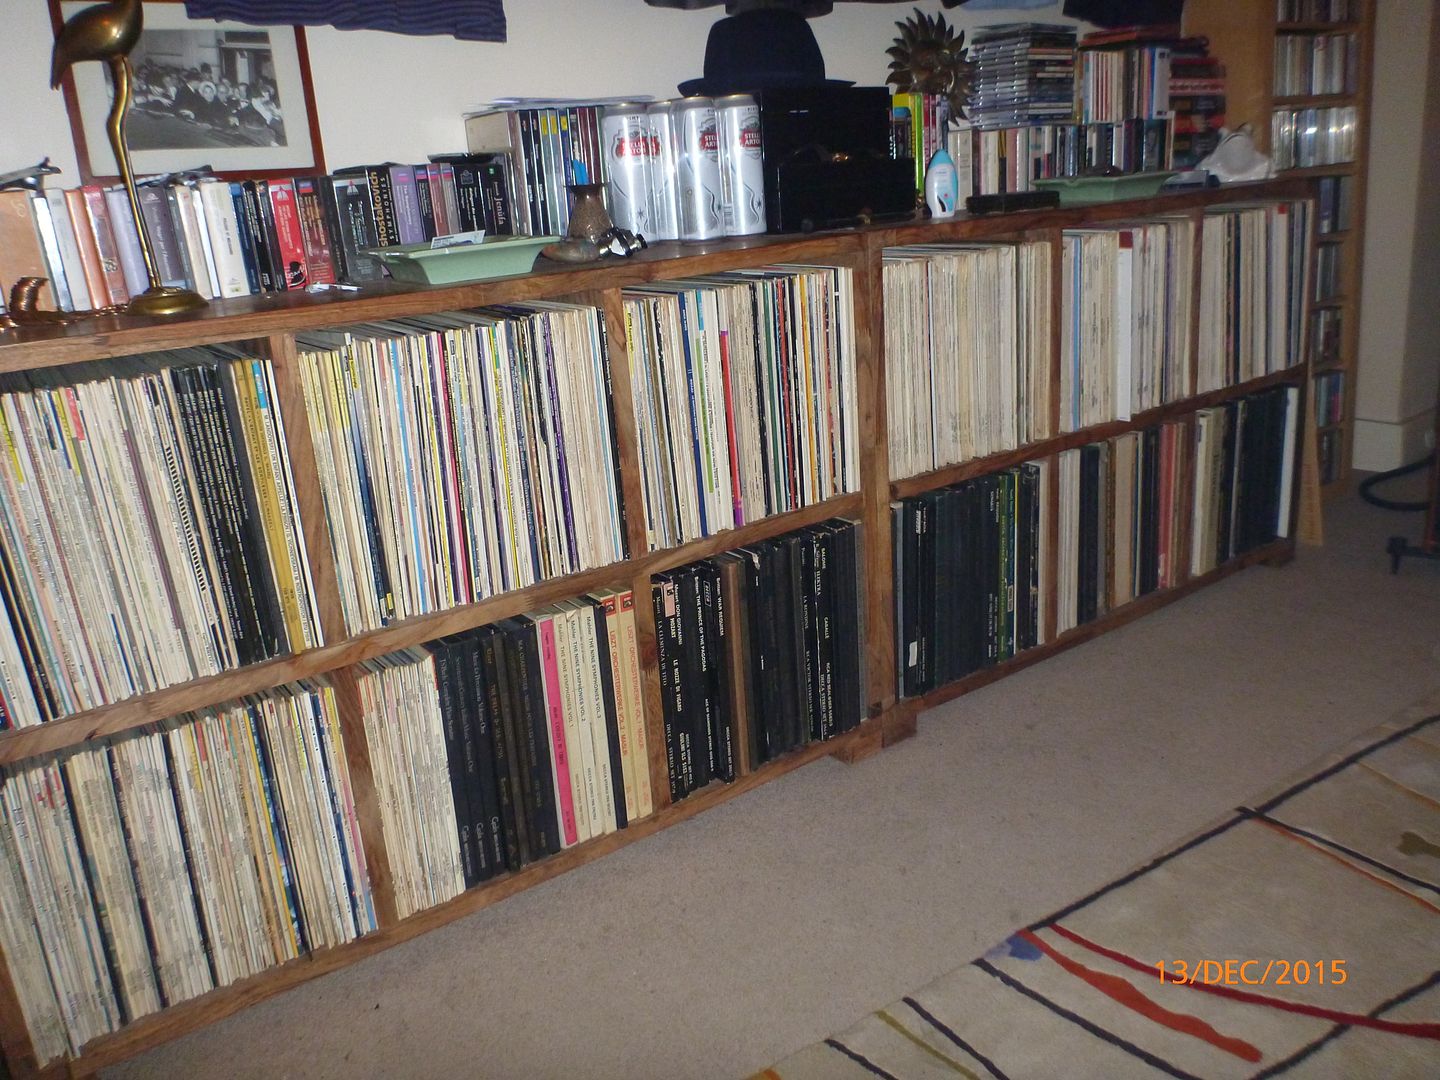 Show Me Your Record Shelving Units Or Give Me Suggestions About